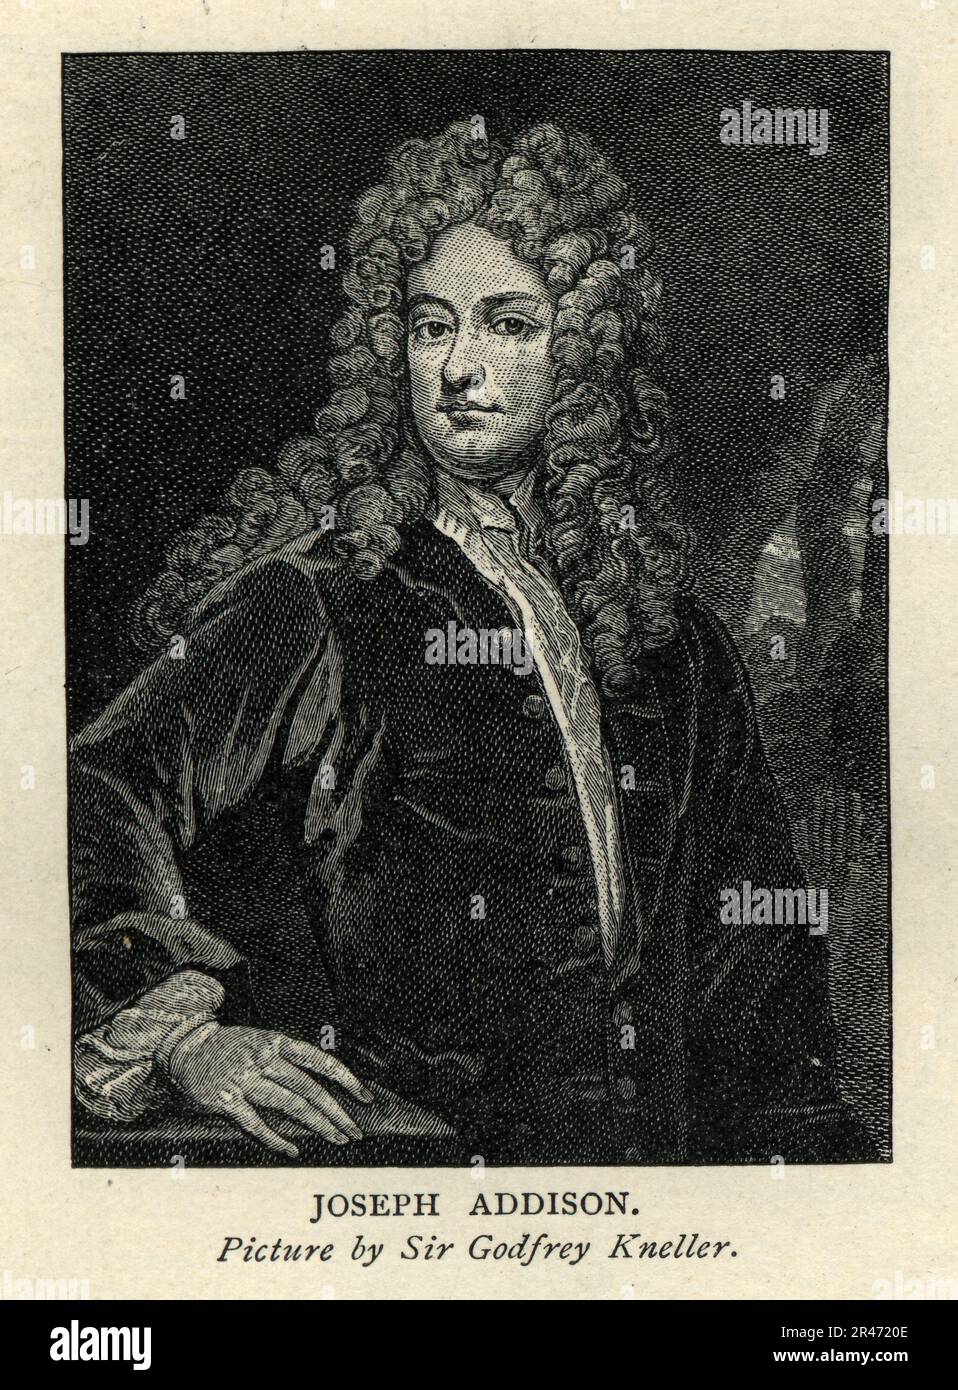 Joseph Addison an English essayist, poet, playwright, and politician. His name is usually remembered alongside that of his long-standing friend Richard Steele, with whom he founded The Spectator magazine. His simple prose style marked the end of the mannerisms and conventional classical images of the 17th century Stock Photo